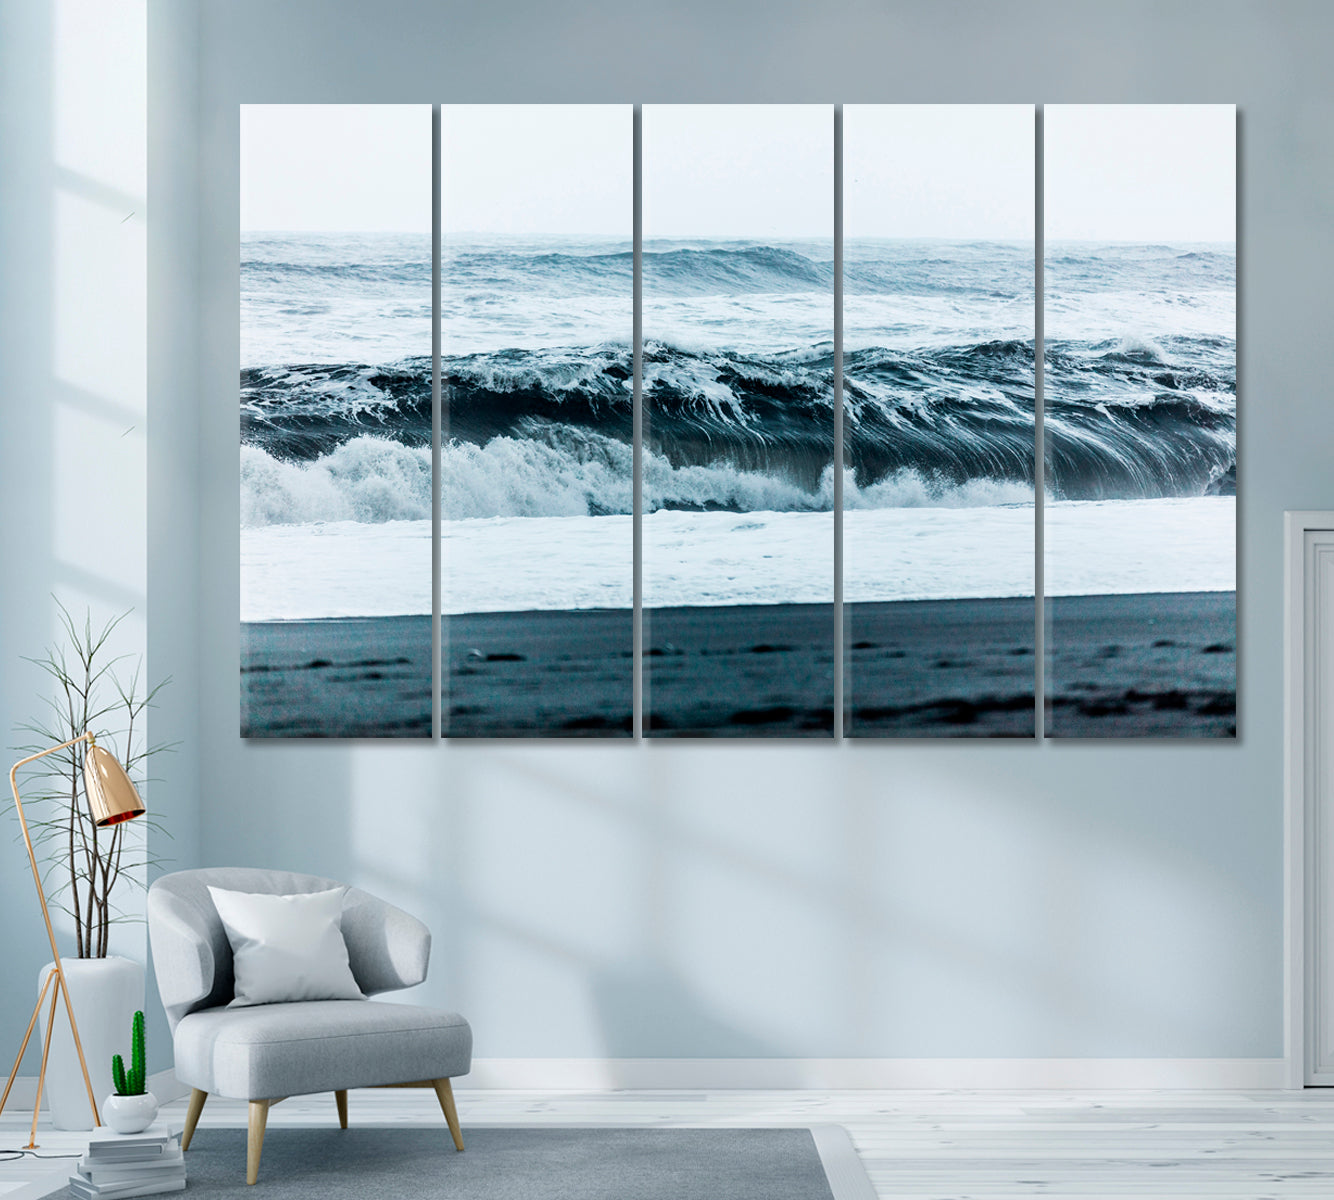 Waves on Vik Beach Iceland Canvas Print ArtLexy 5 Panels 36"x24" inches 